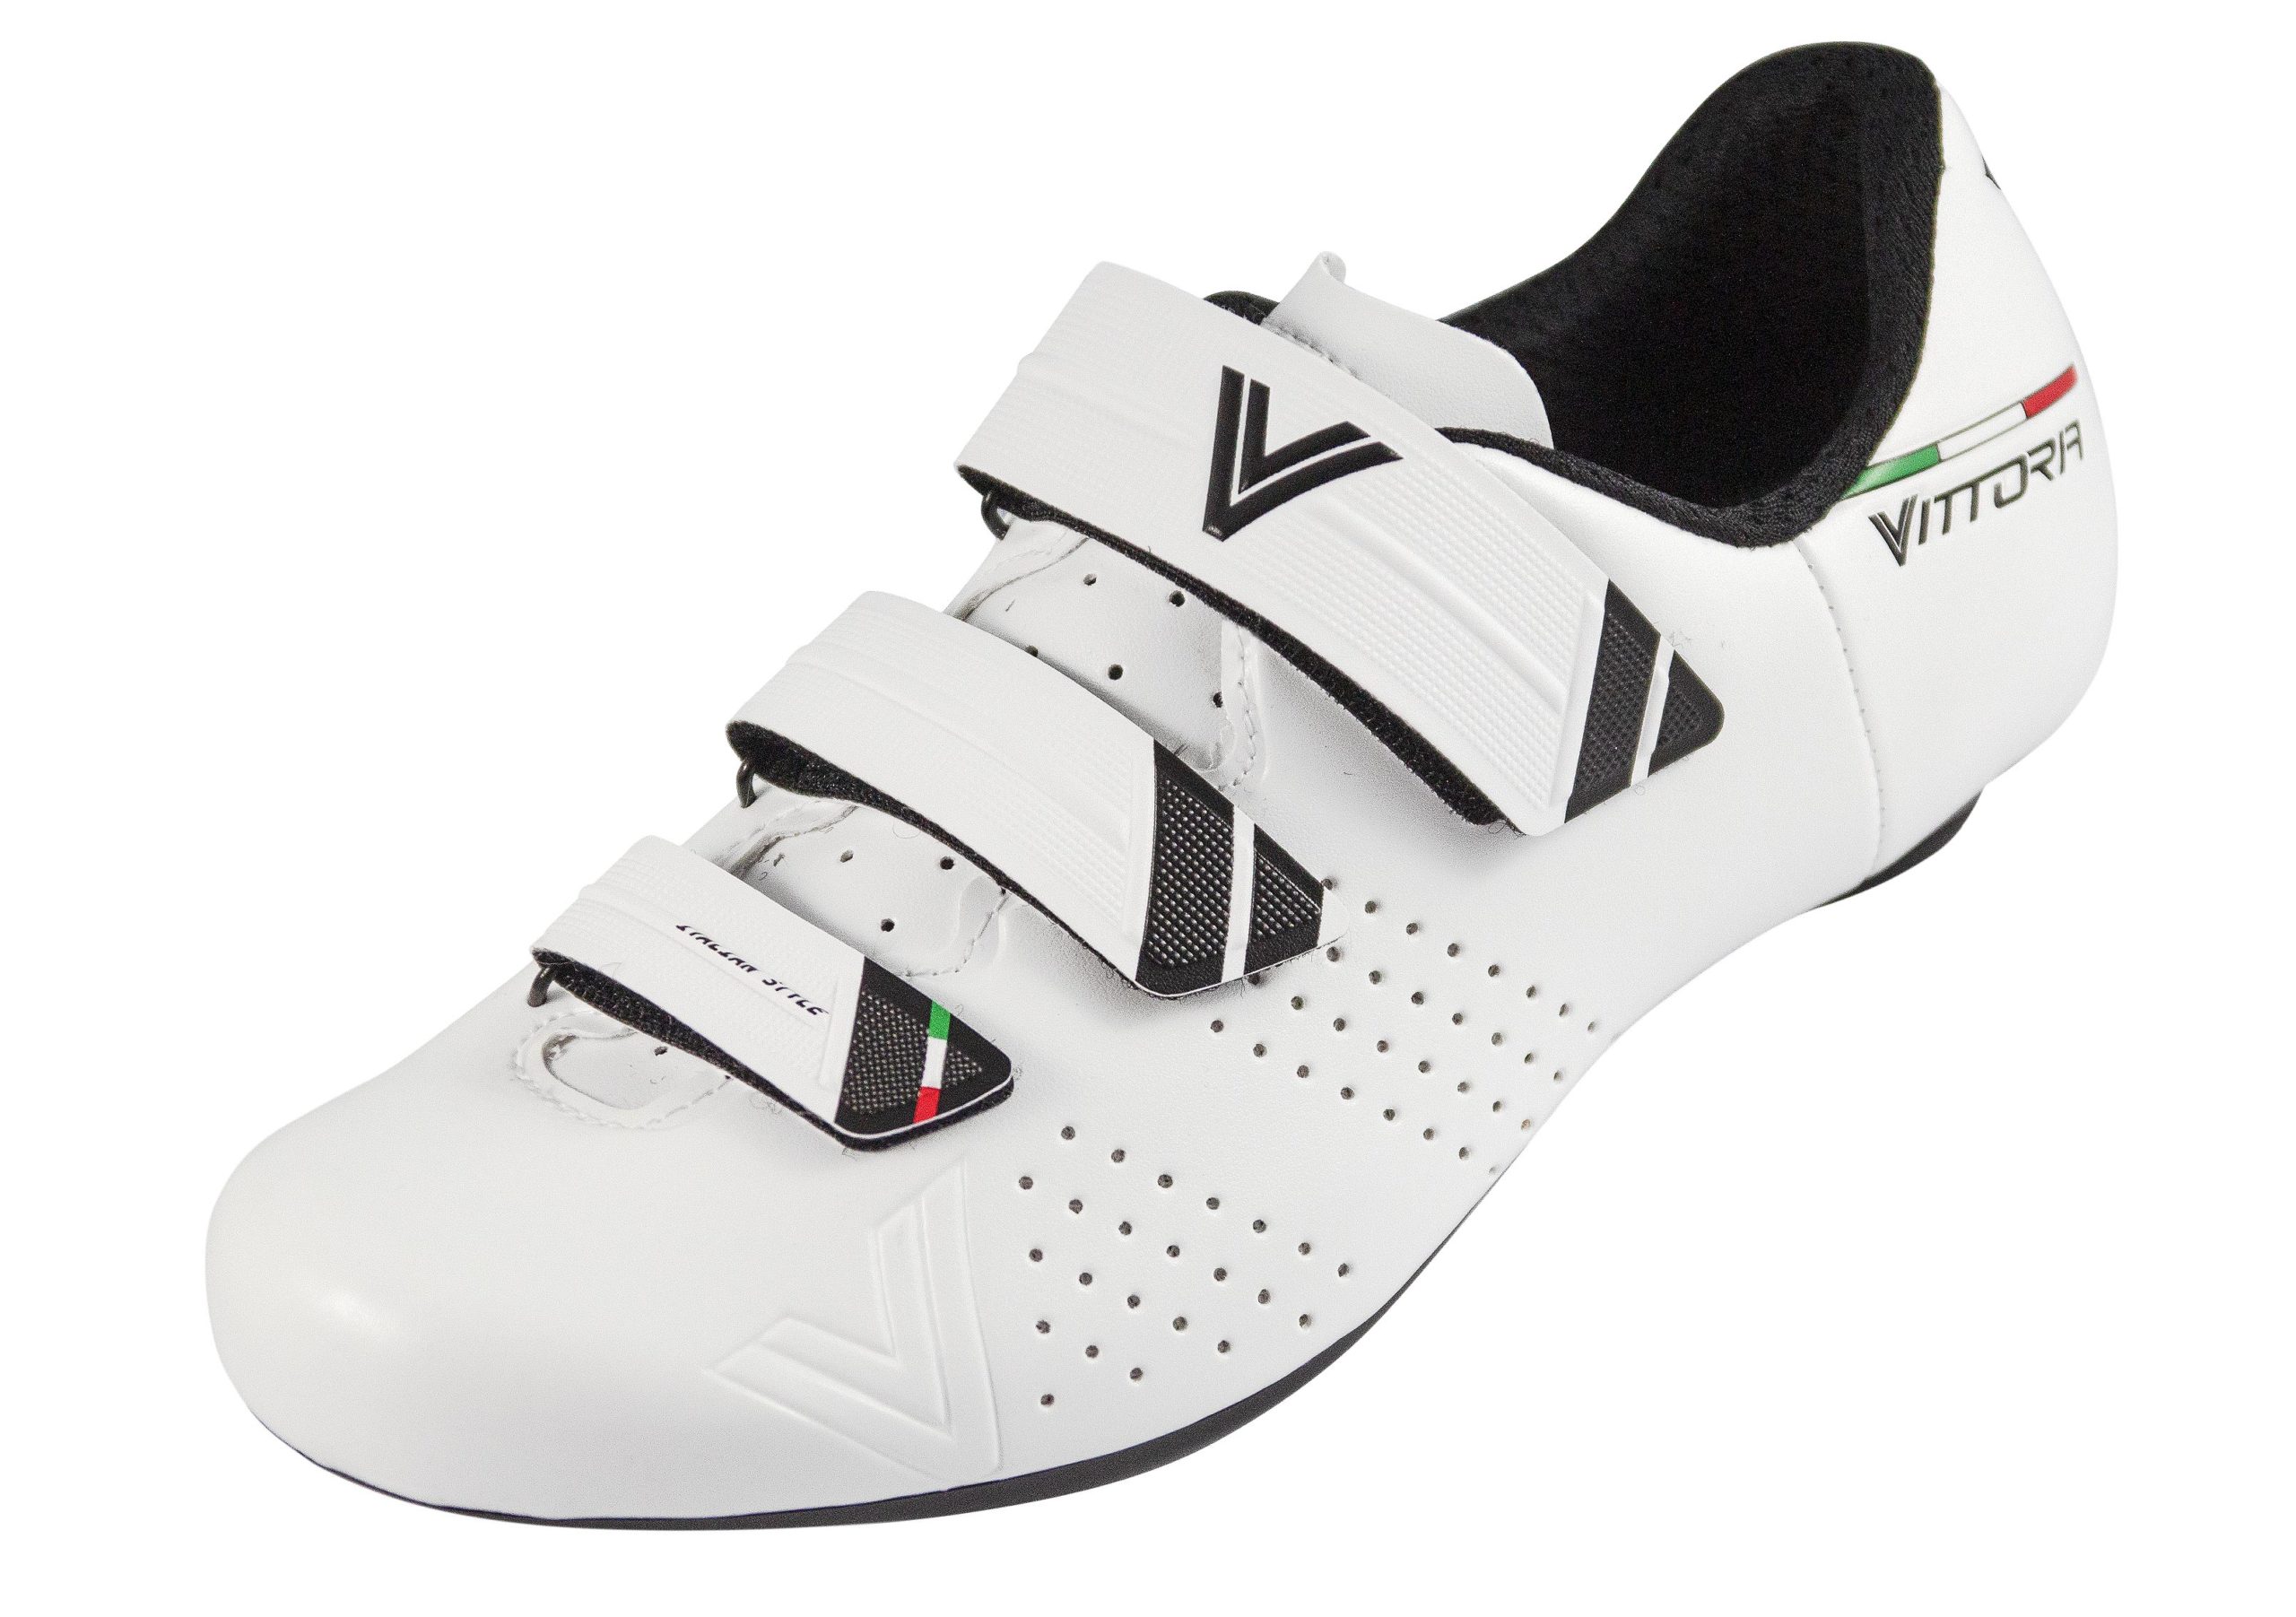 VITTORIA RAPIDE ROAD CYCLING SHOES 